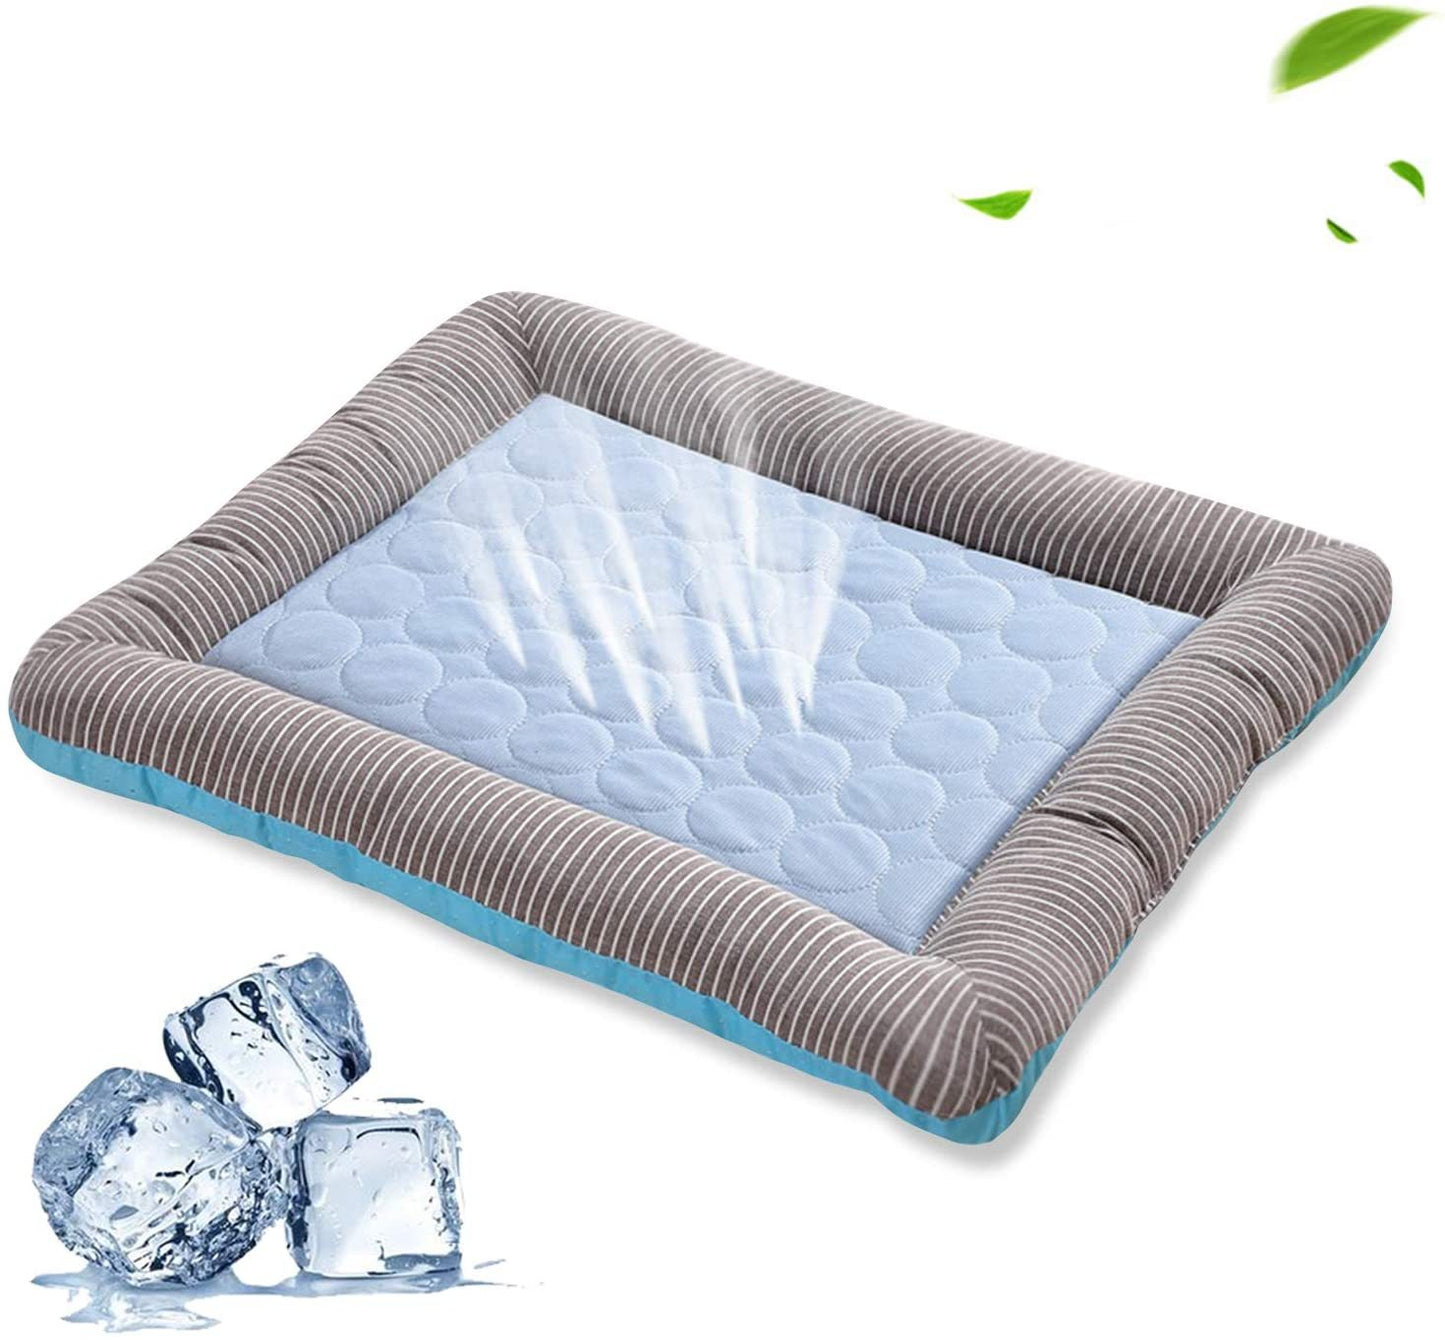 Pet Cooling Pad Bed For Dogs Cats Puppy Kitten Cool Mat Pet Blanket Ice Silk Material Soft For Summer Sleeping  Blue Breathable Pet bed